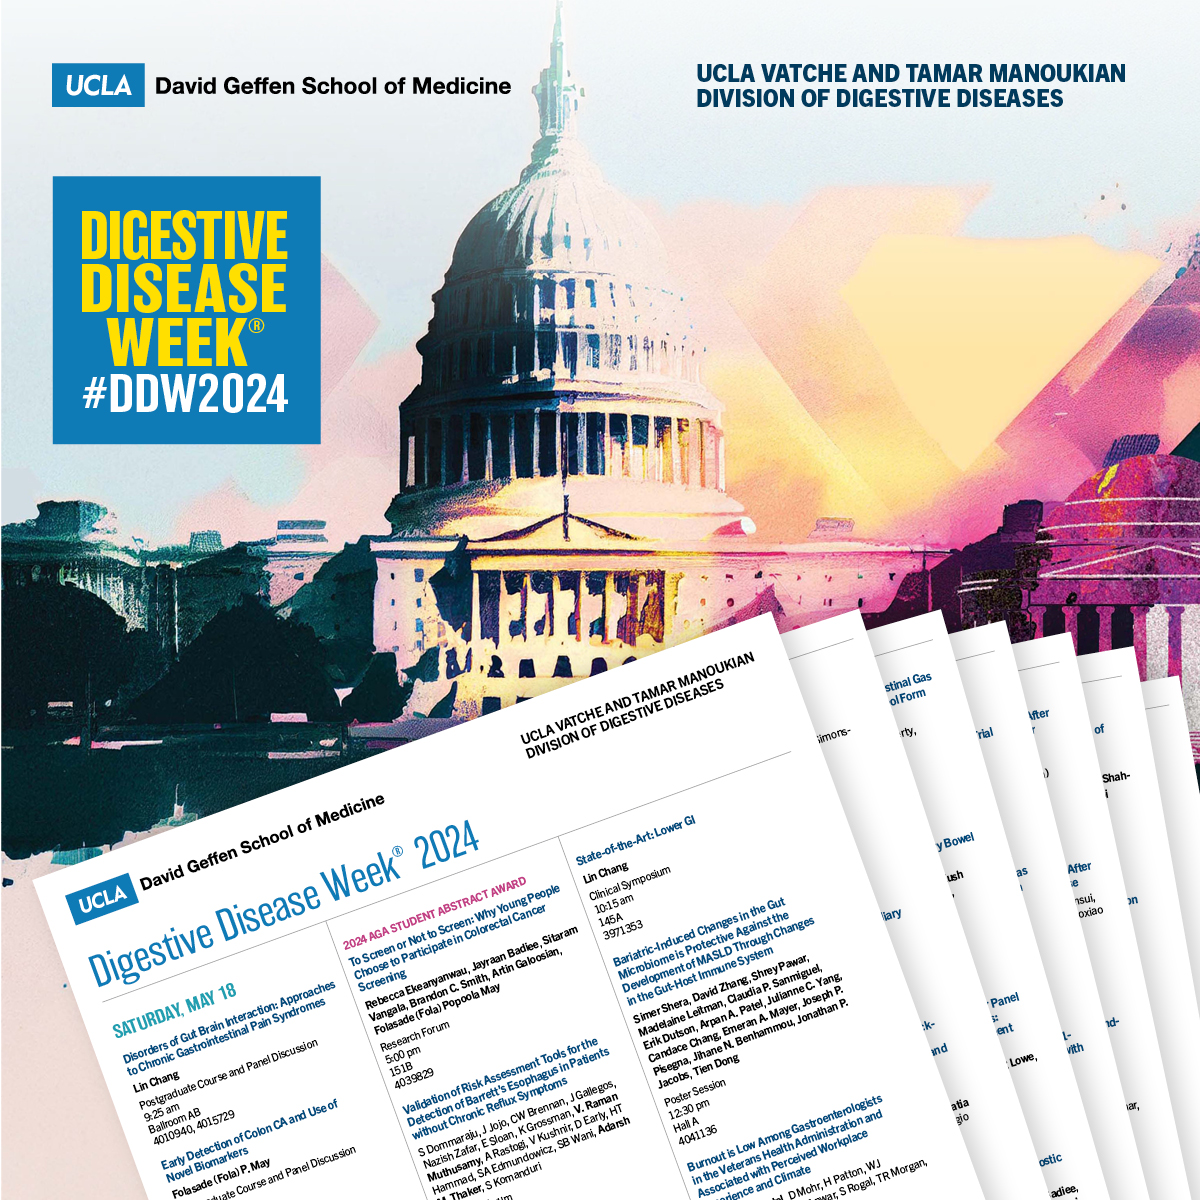 🙌Ready for #DDW2024! We can't wait to share the #UCLAGI research, conducted with our amazing collaborators, and hope you will join us at one (or more) of our 1⃣1⃣1⃣ lectures/workshops/poster sessions. View list and add us to your @DDWMeeting calendar! 👉uclahealth.org/sites/default/…